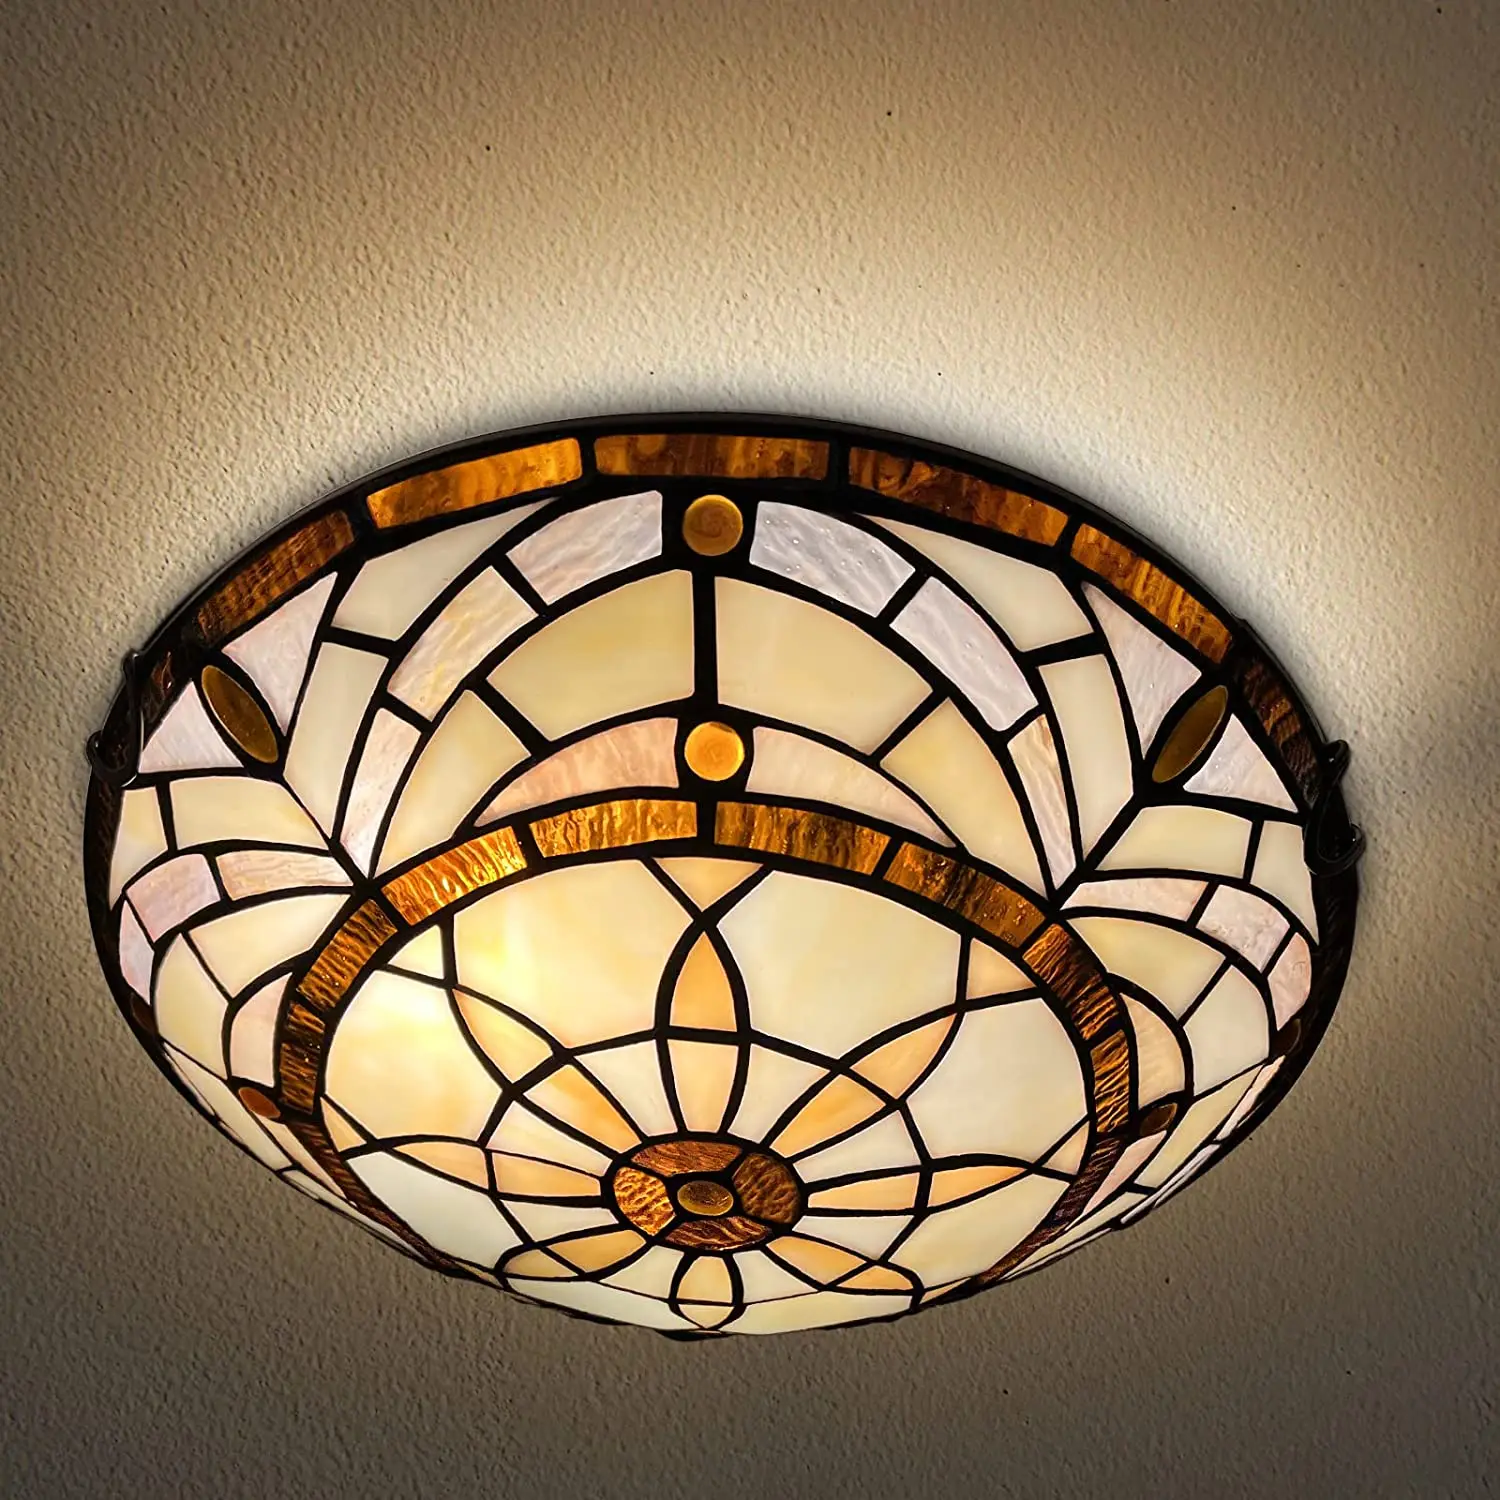 

Tiffany Ceiling Lights Stained Glass Hang Lamp 2-Lights 12 Inch Flush Mount Ceiling Light For Bedroom Dining Living Room